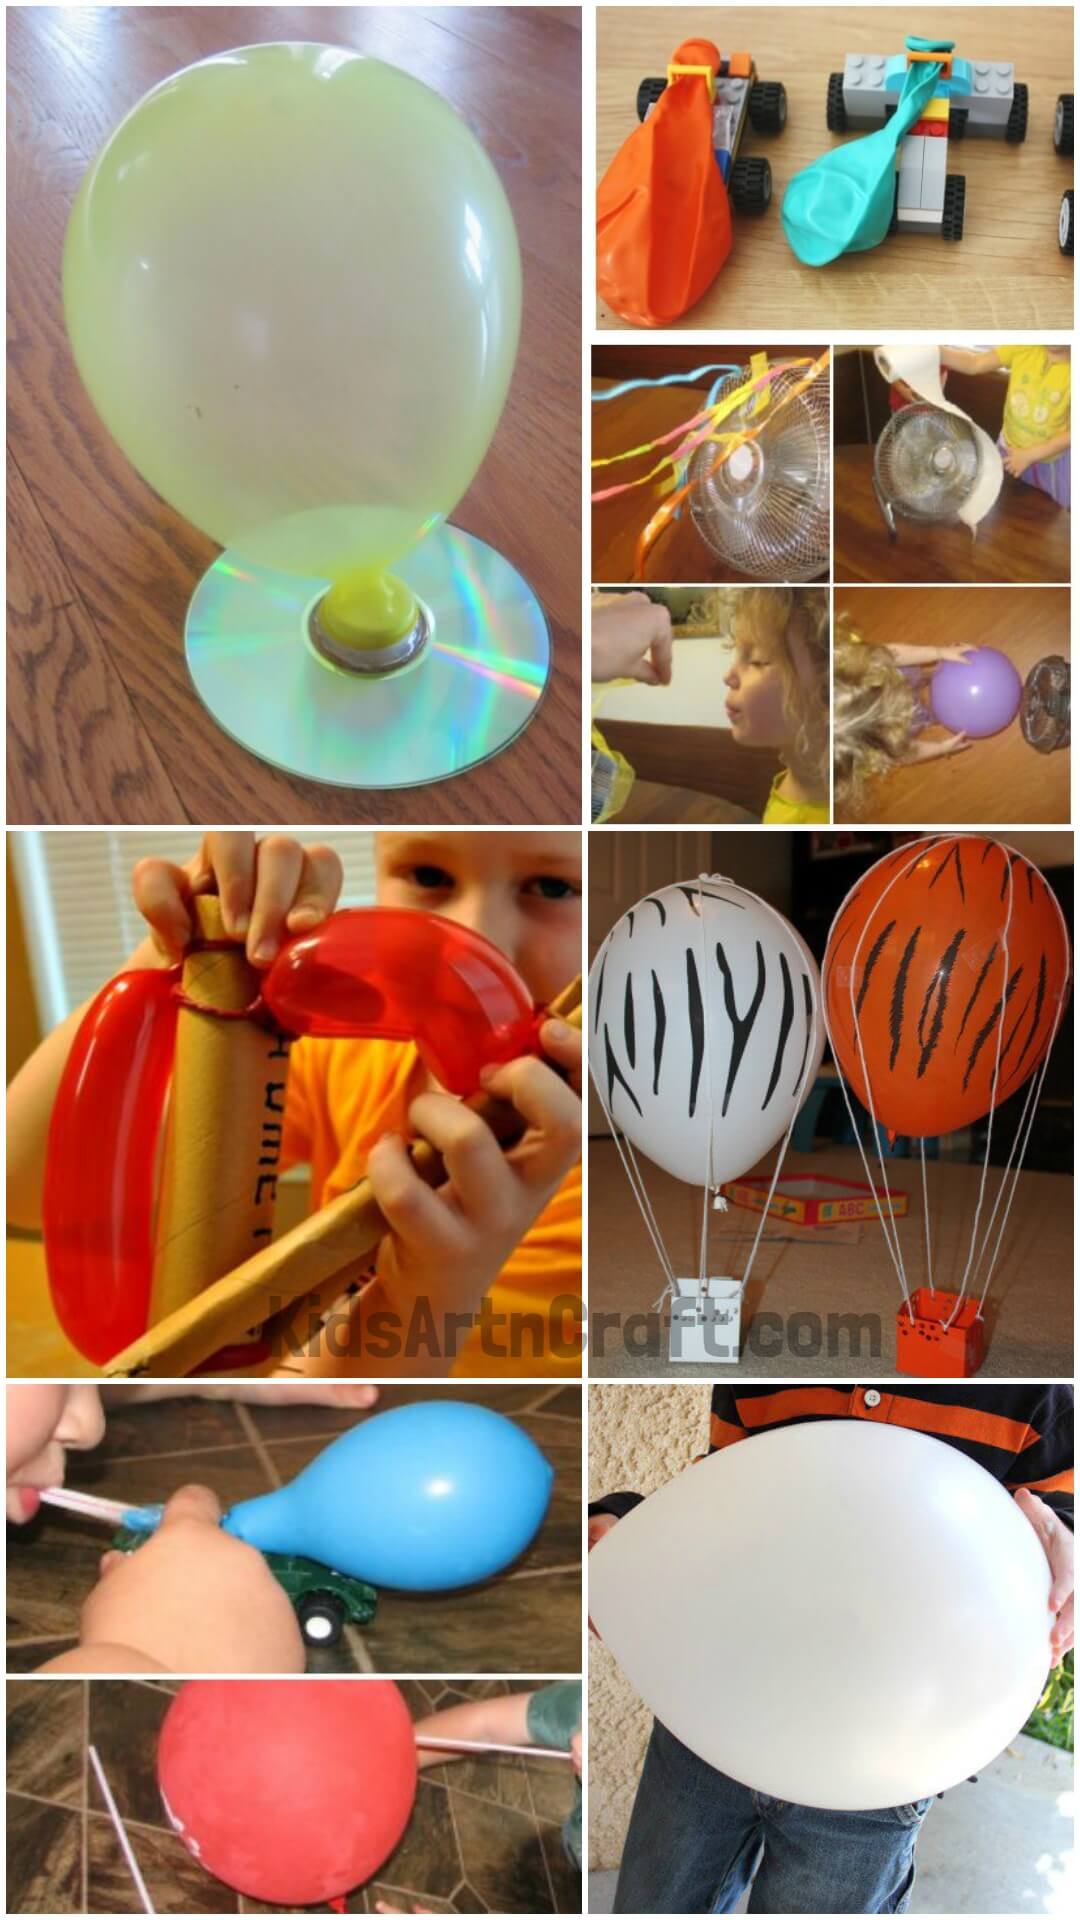 Balloon Science Experiments for Kids